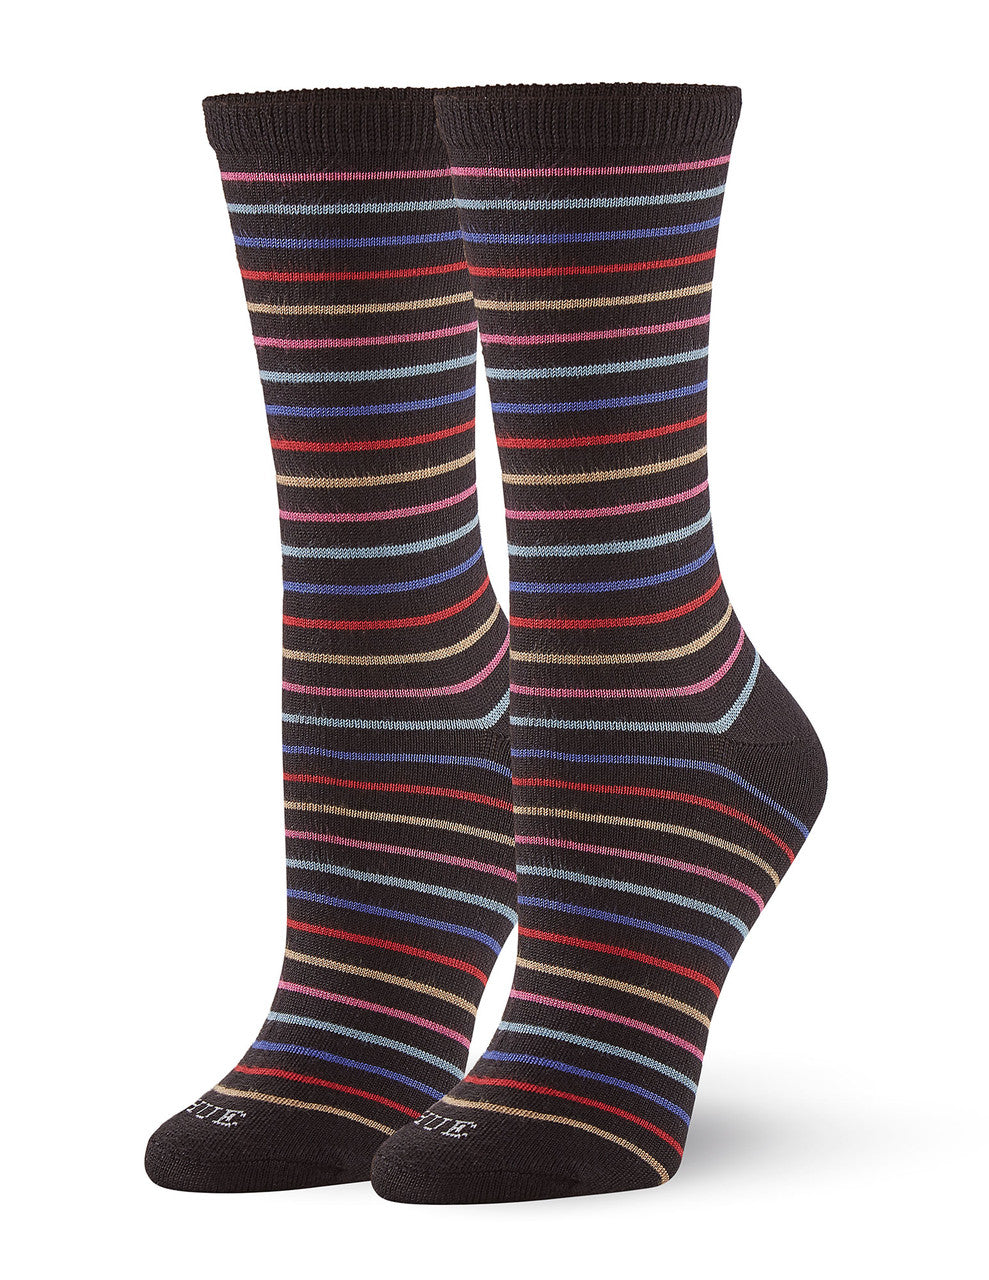 comfort and style Hue Super Soft Crew Sock